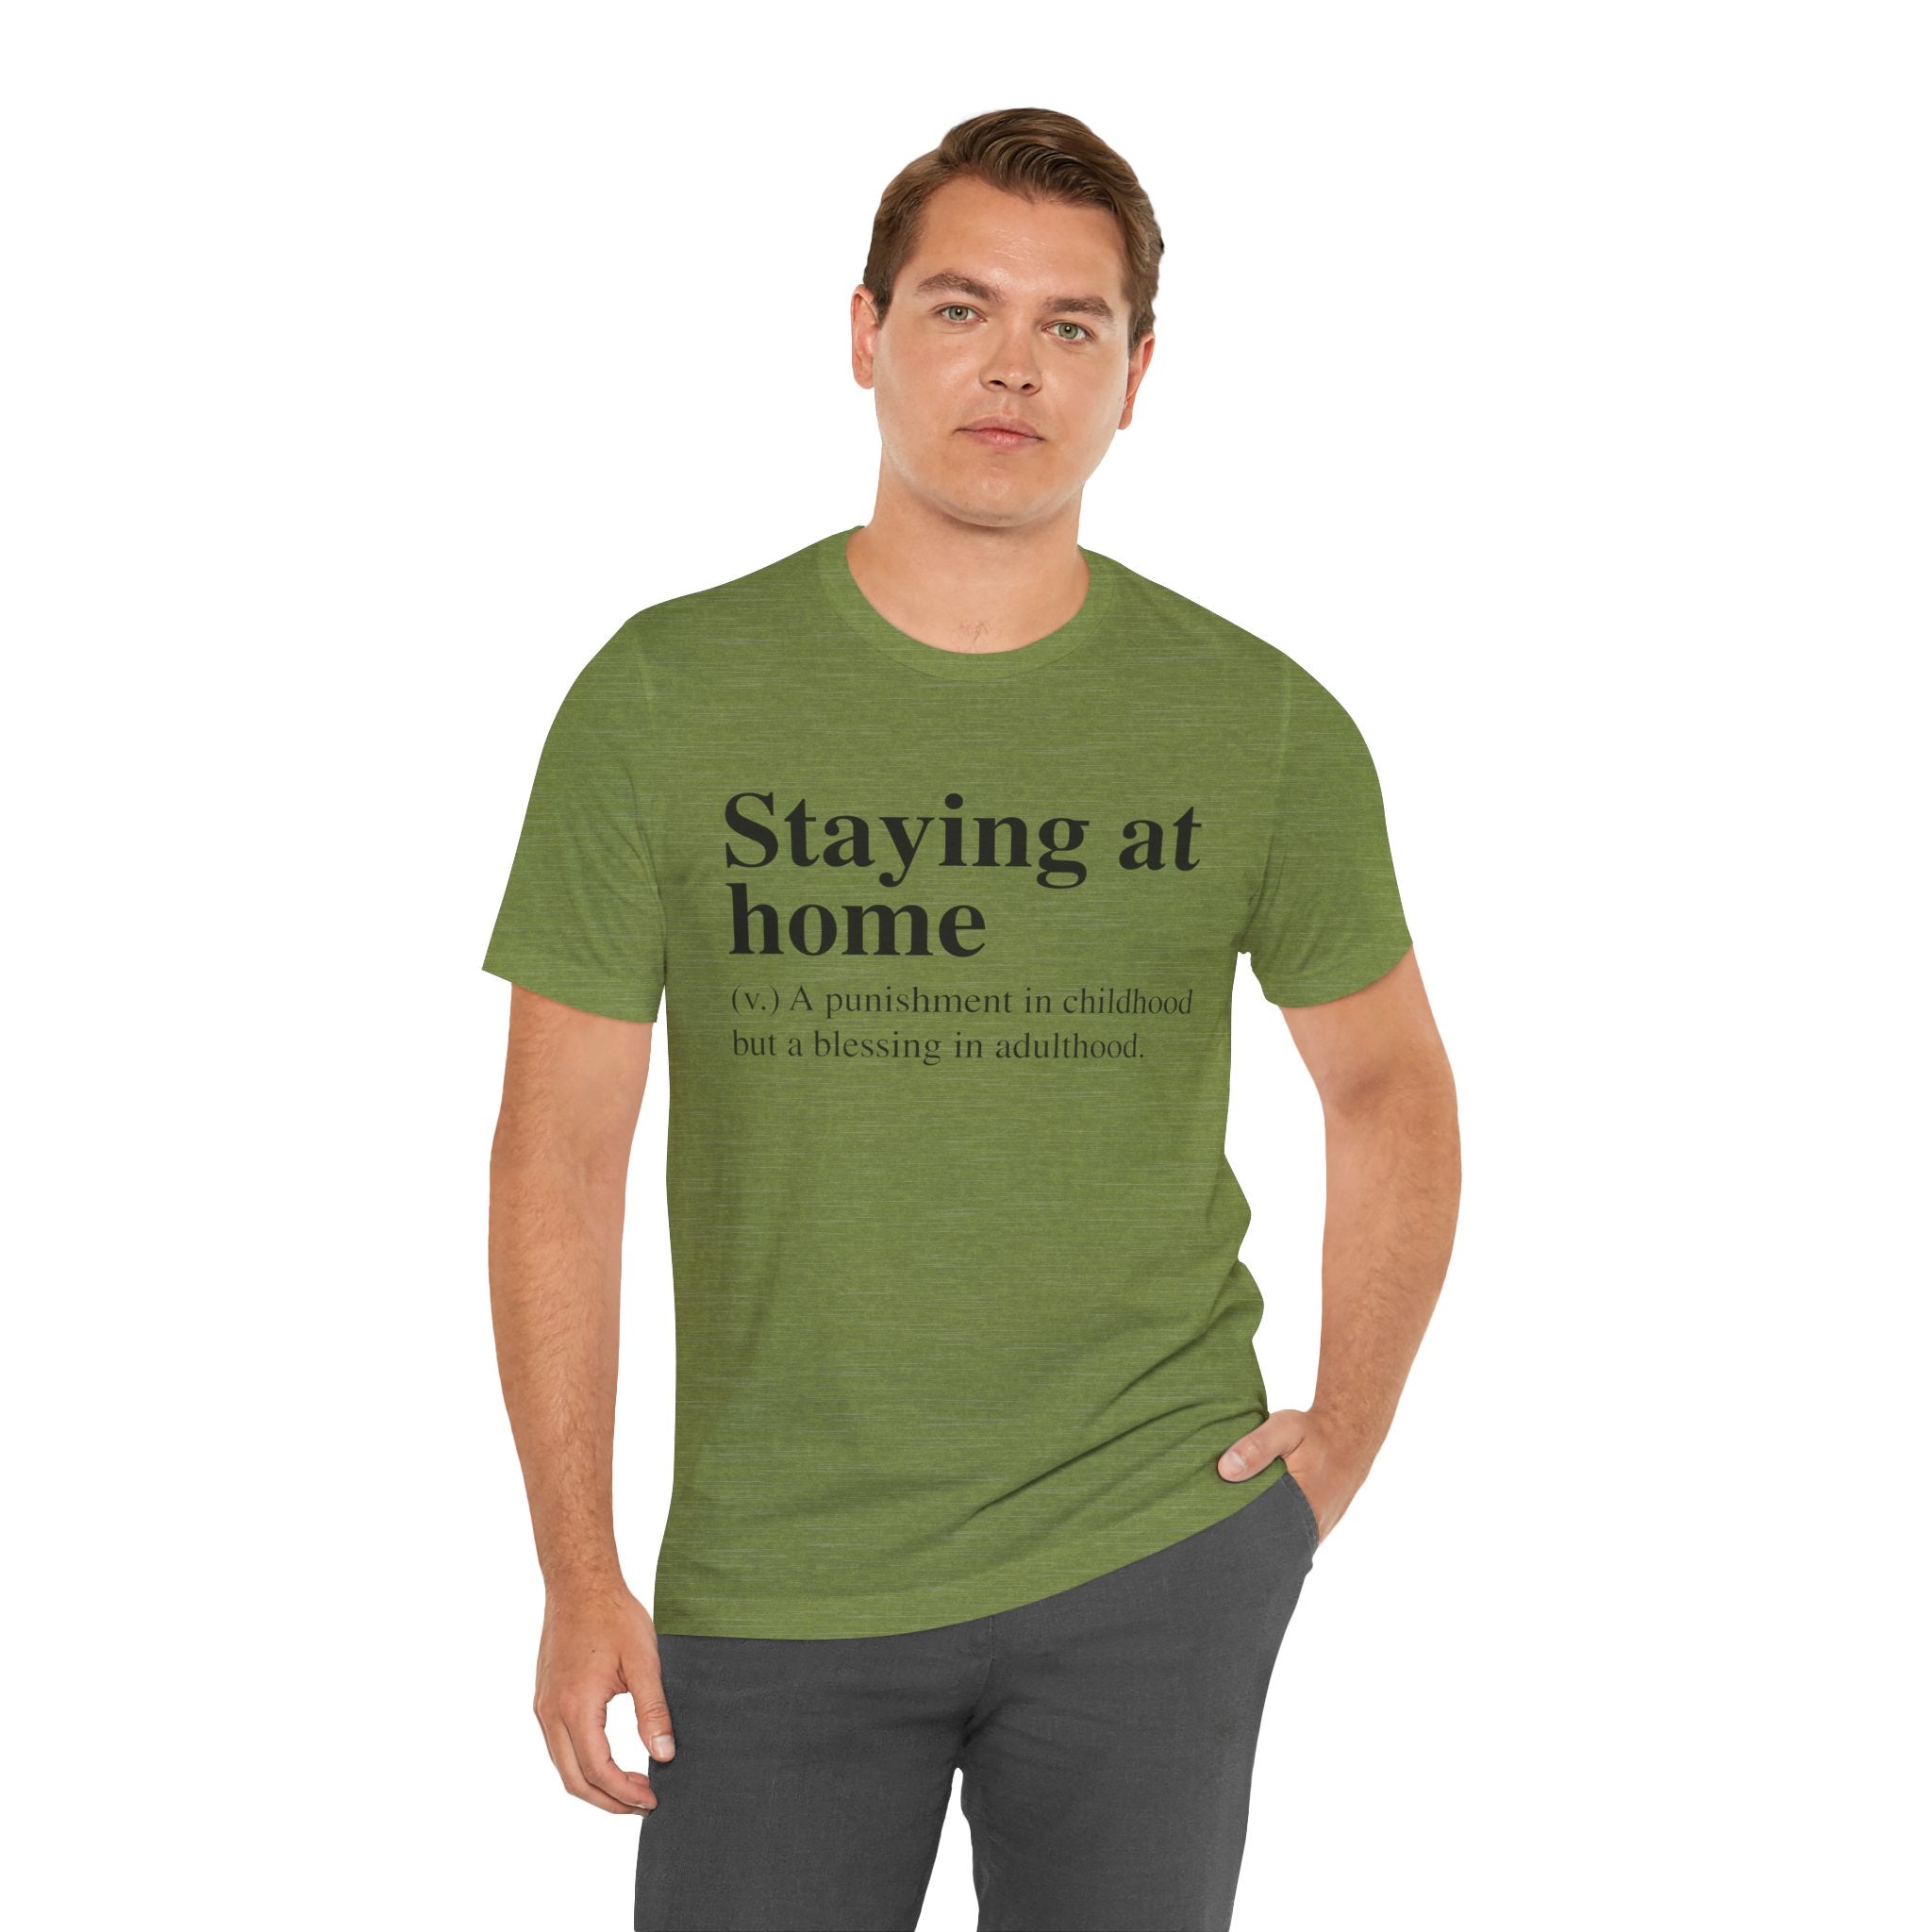 Man in green Staying at Home T-Shirt with text "staying at home - a punishment in childhood but a blessing in adulthood" standing against a plain background.